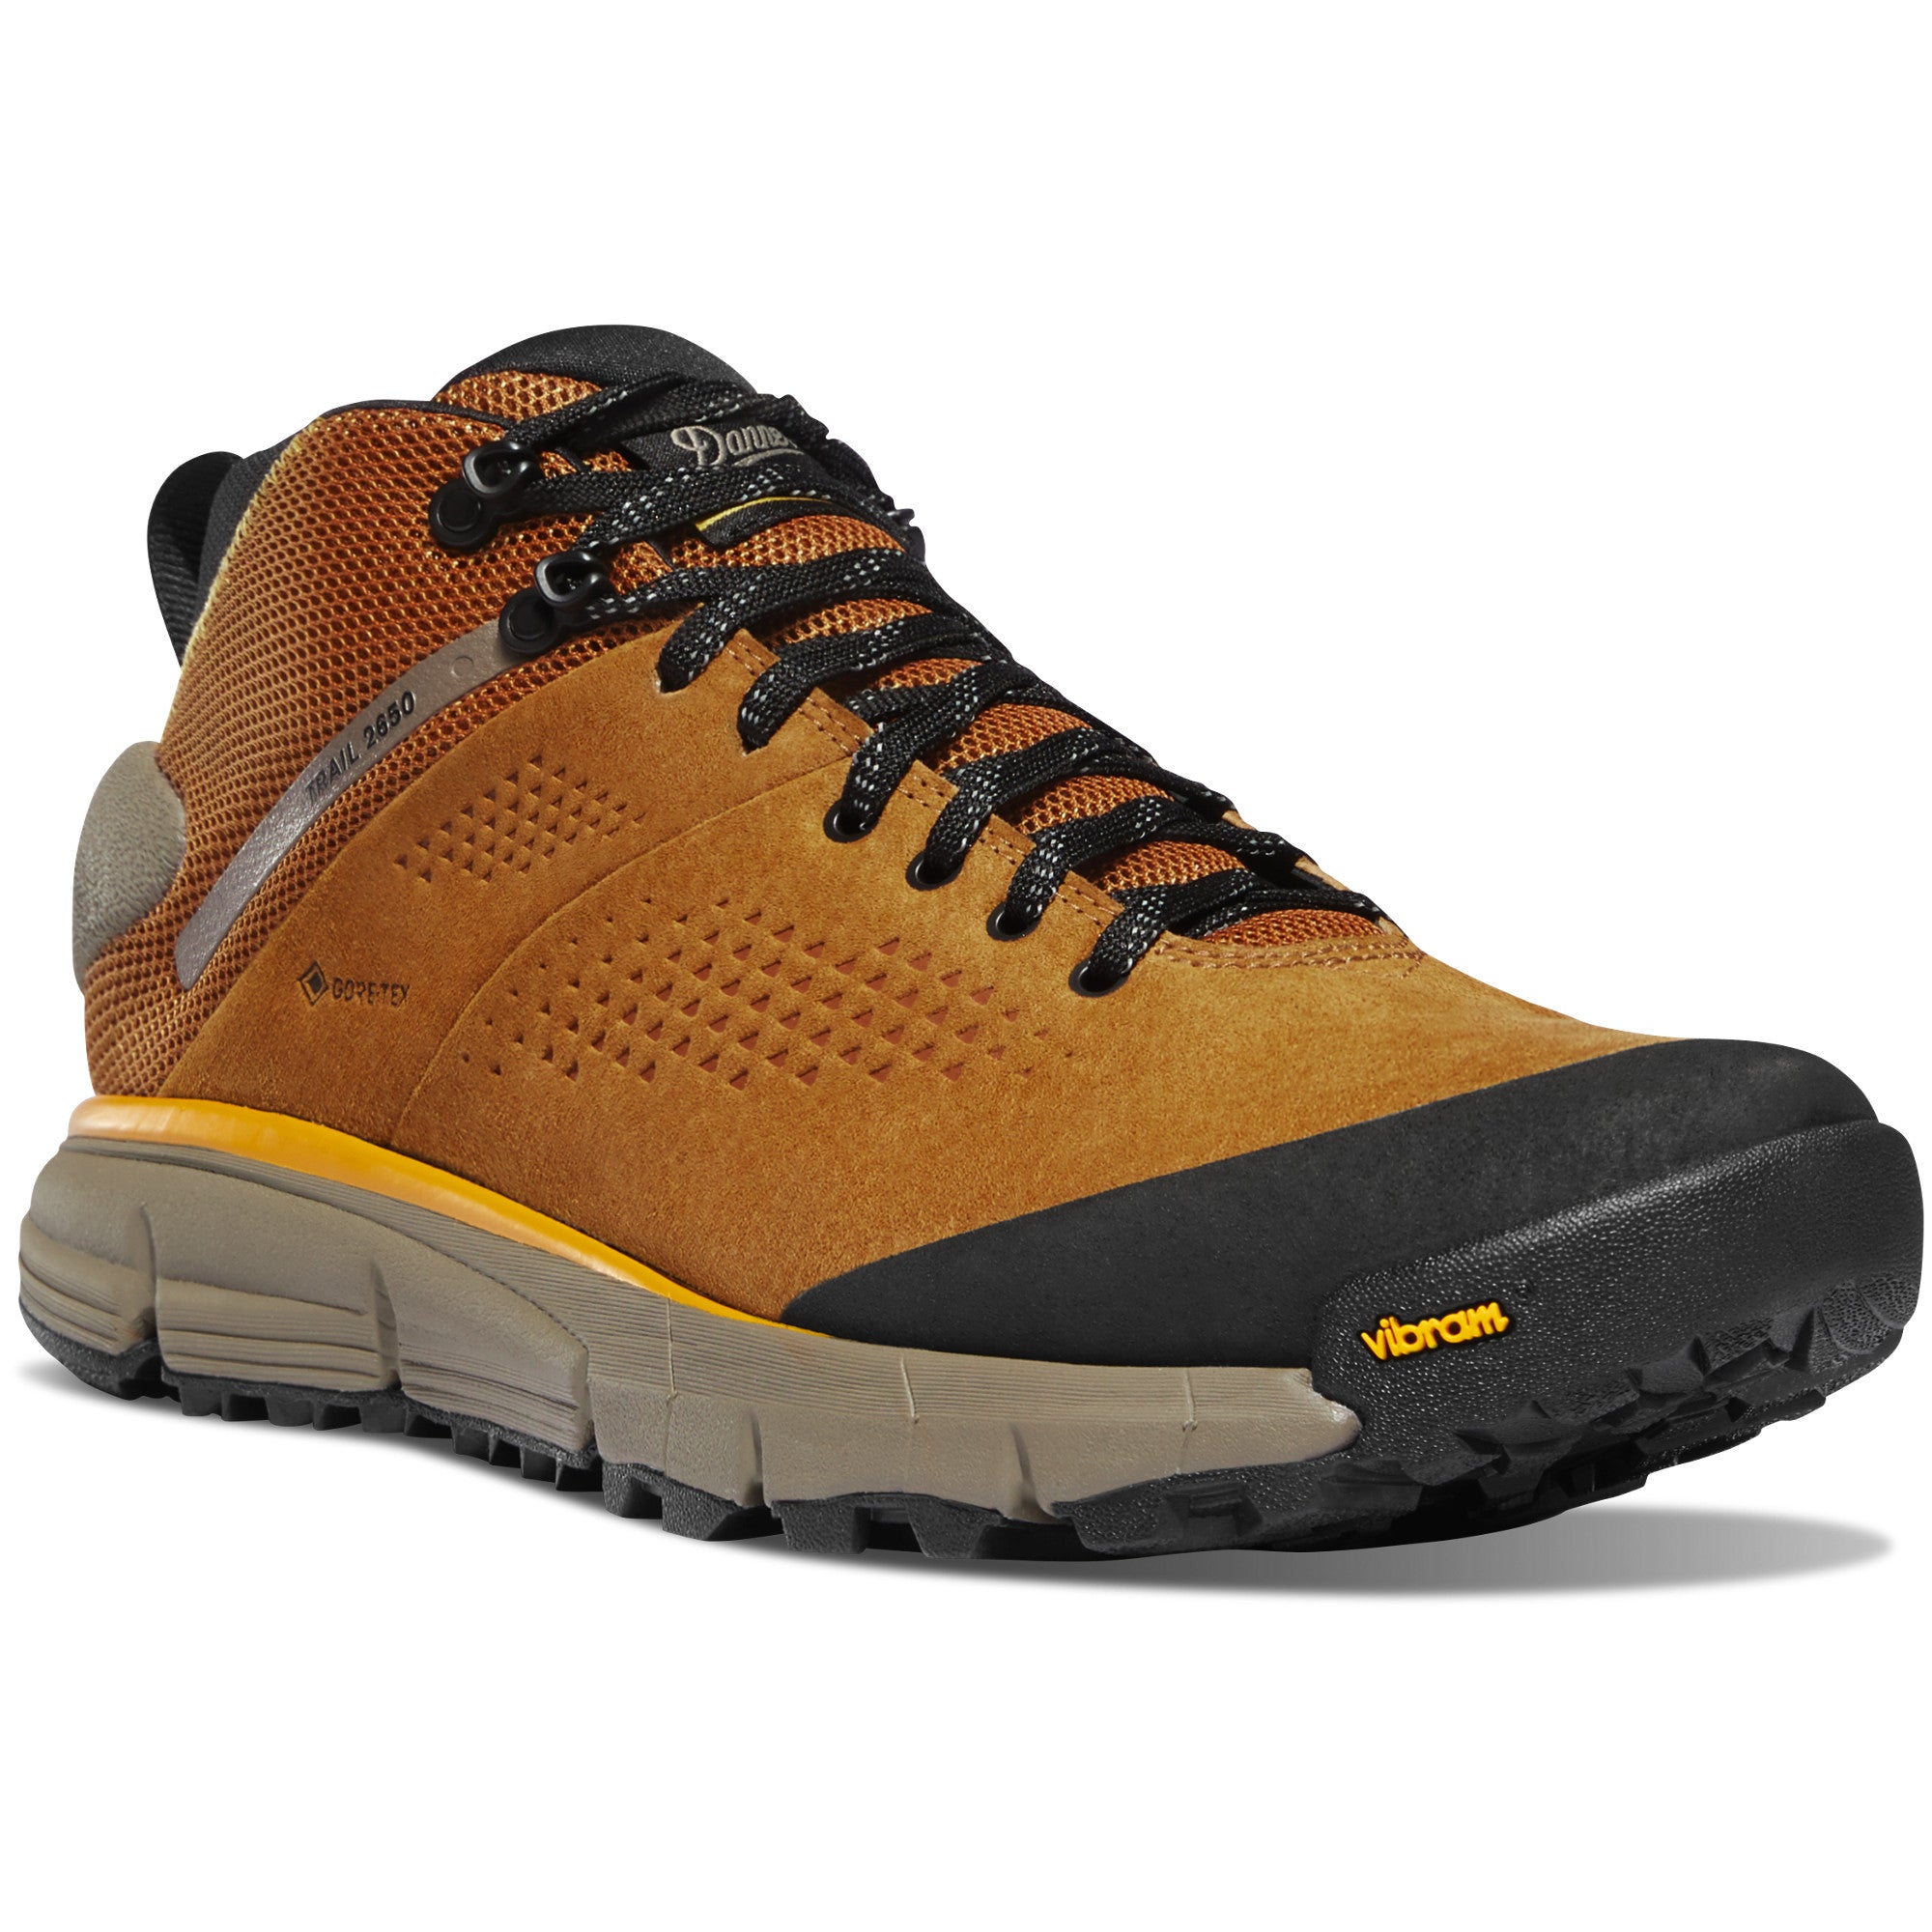 Danner Men's Trail 2650 Mid 4" Gore-Tex Waterproof Hiking Boot in Brown/Gold from the side